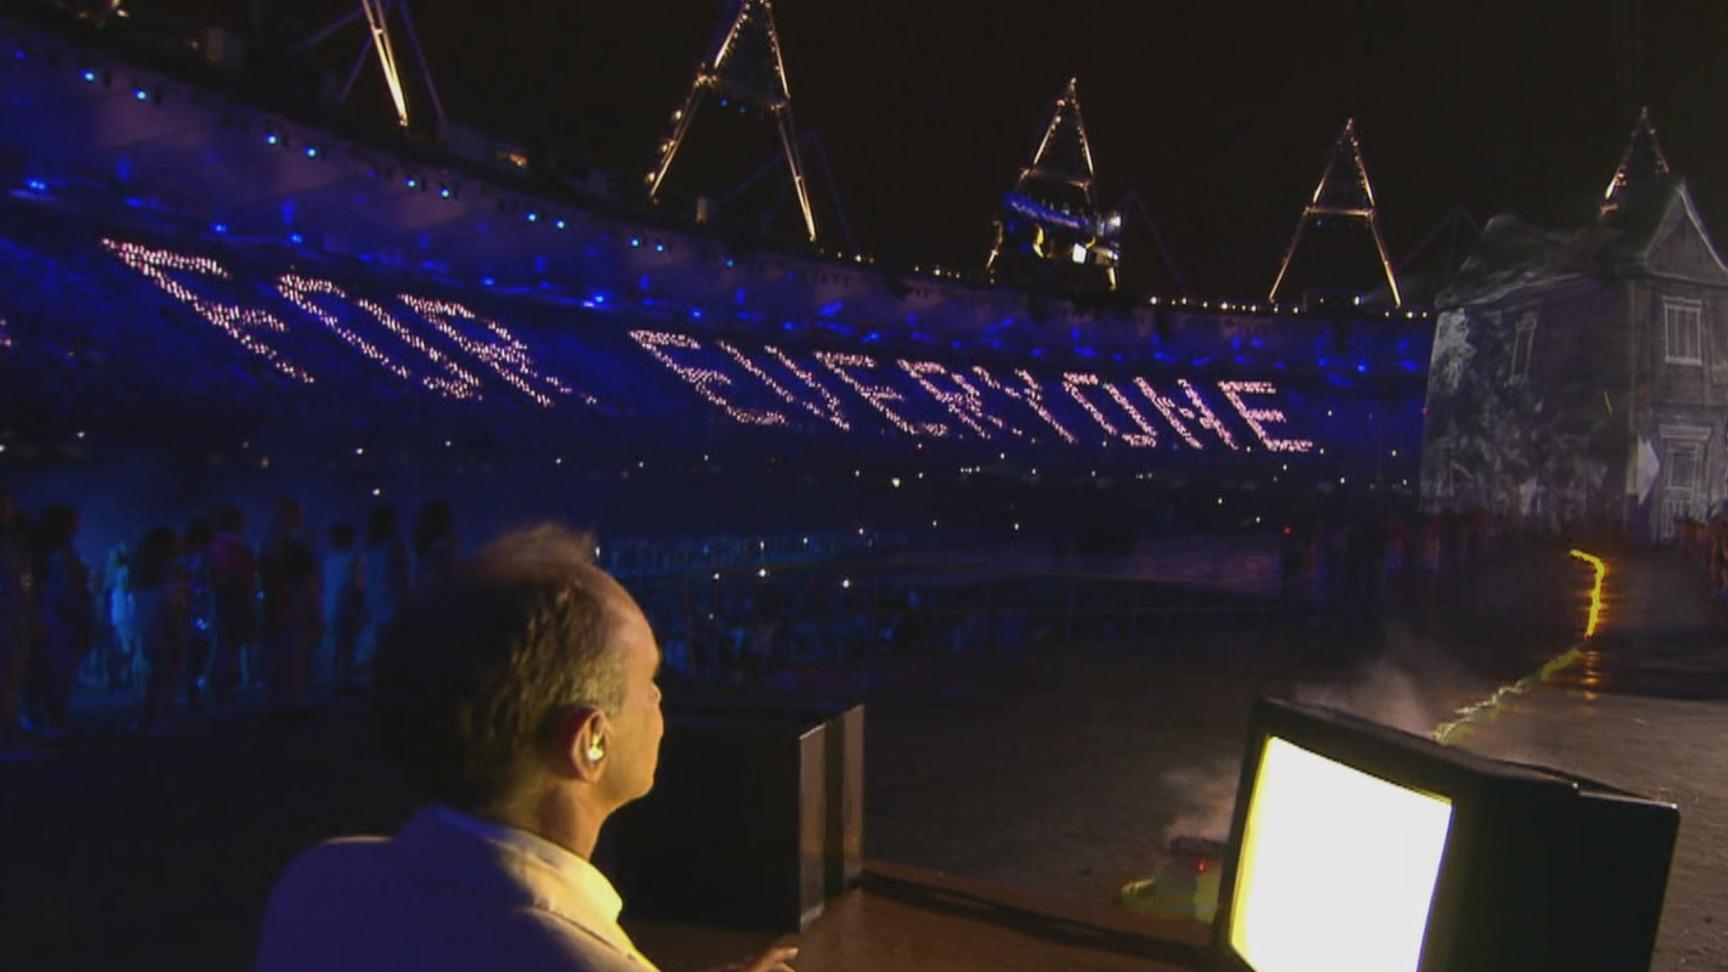 Tim Berners-Lee tweets that 'This is for everyone' at the 2012 Olympic Games opening ceremony using the NeXT computer he built the original browser and web server on.